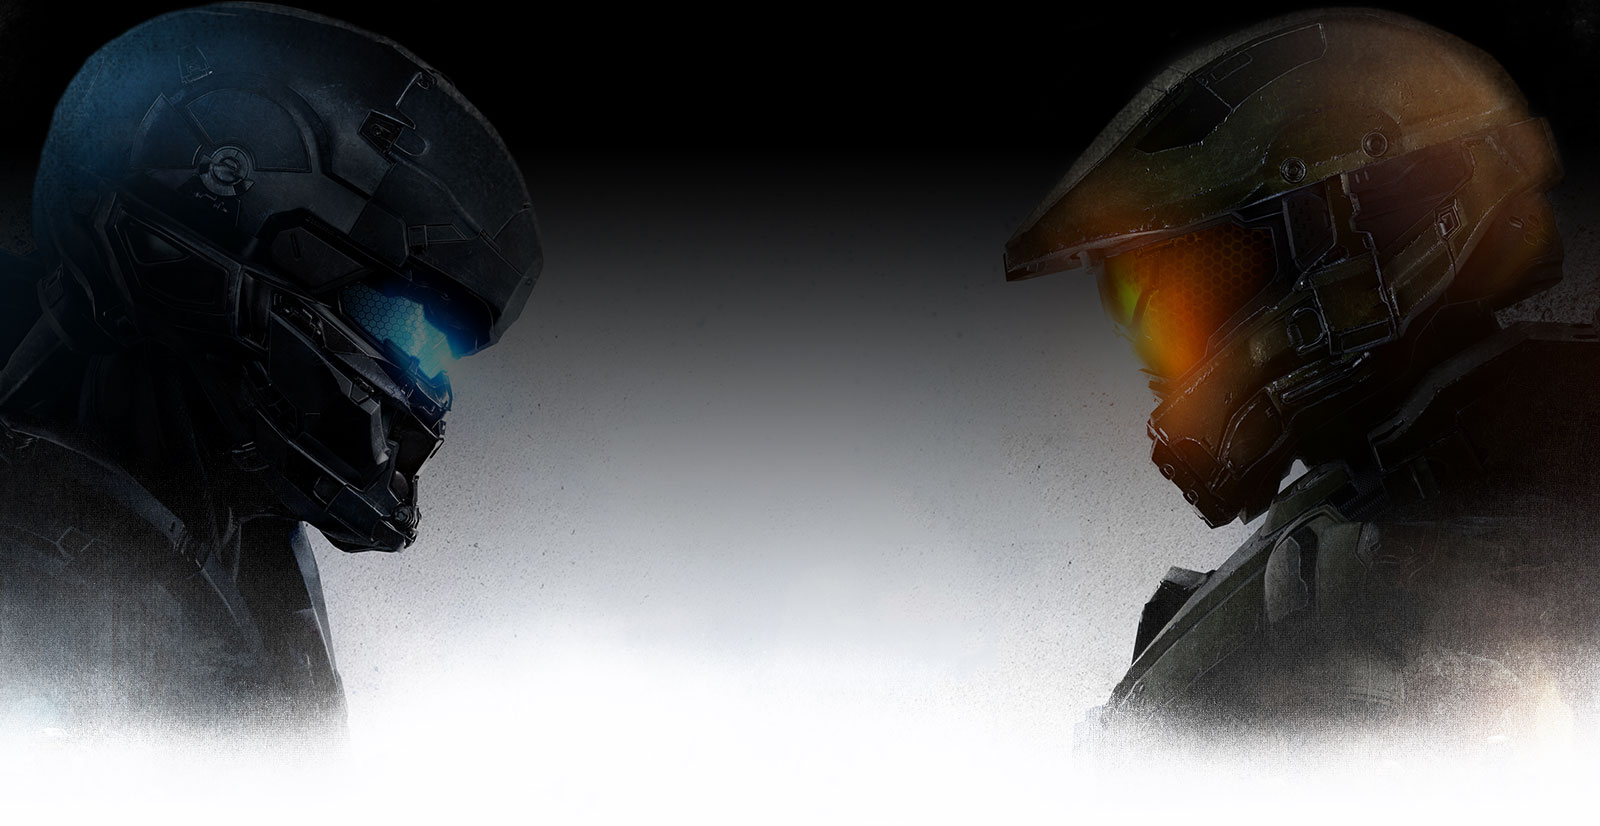 Halo 5 blue team character and Master chief face off